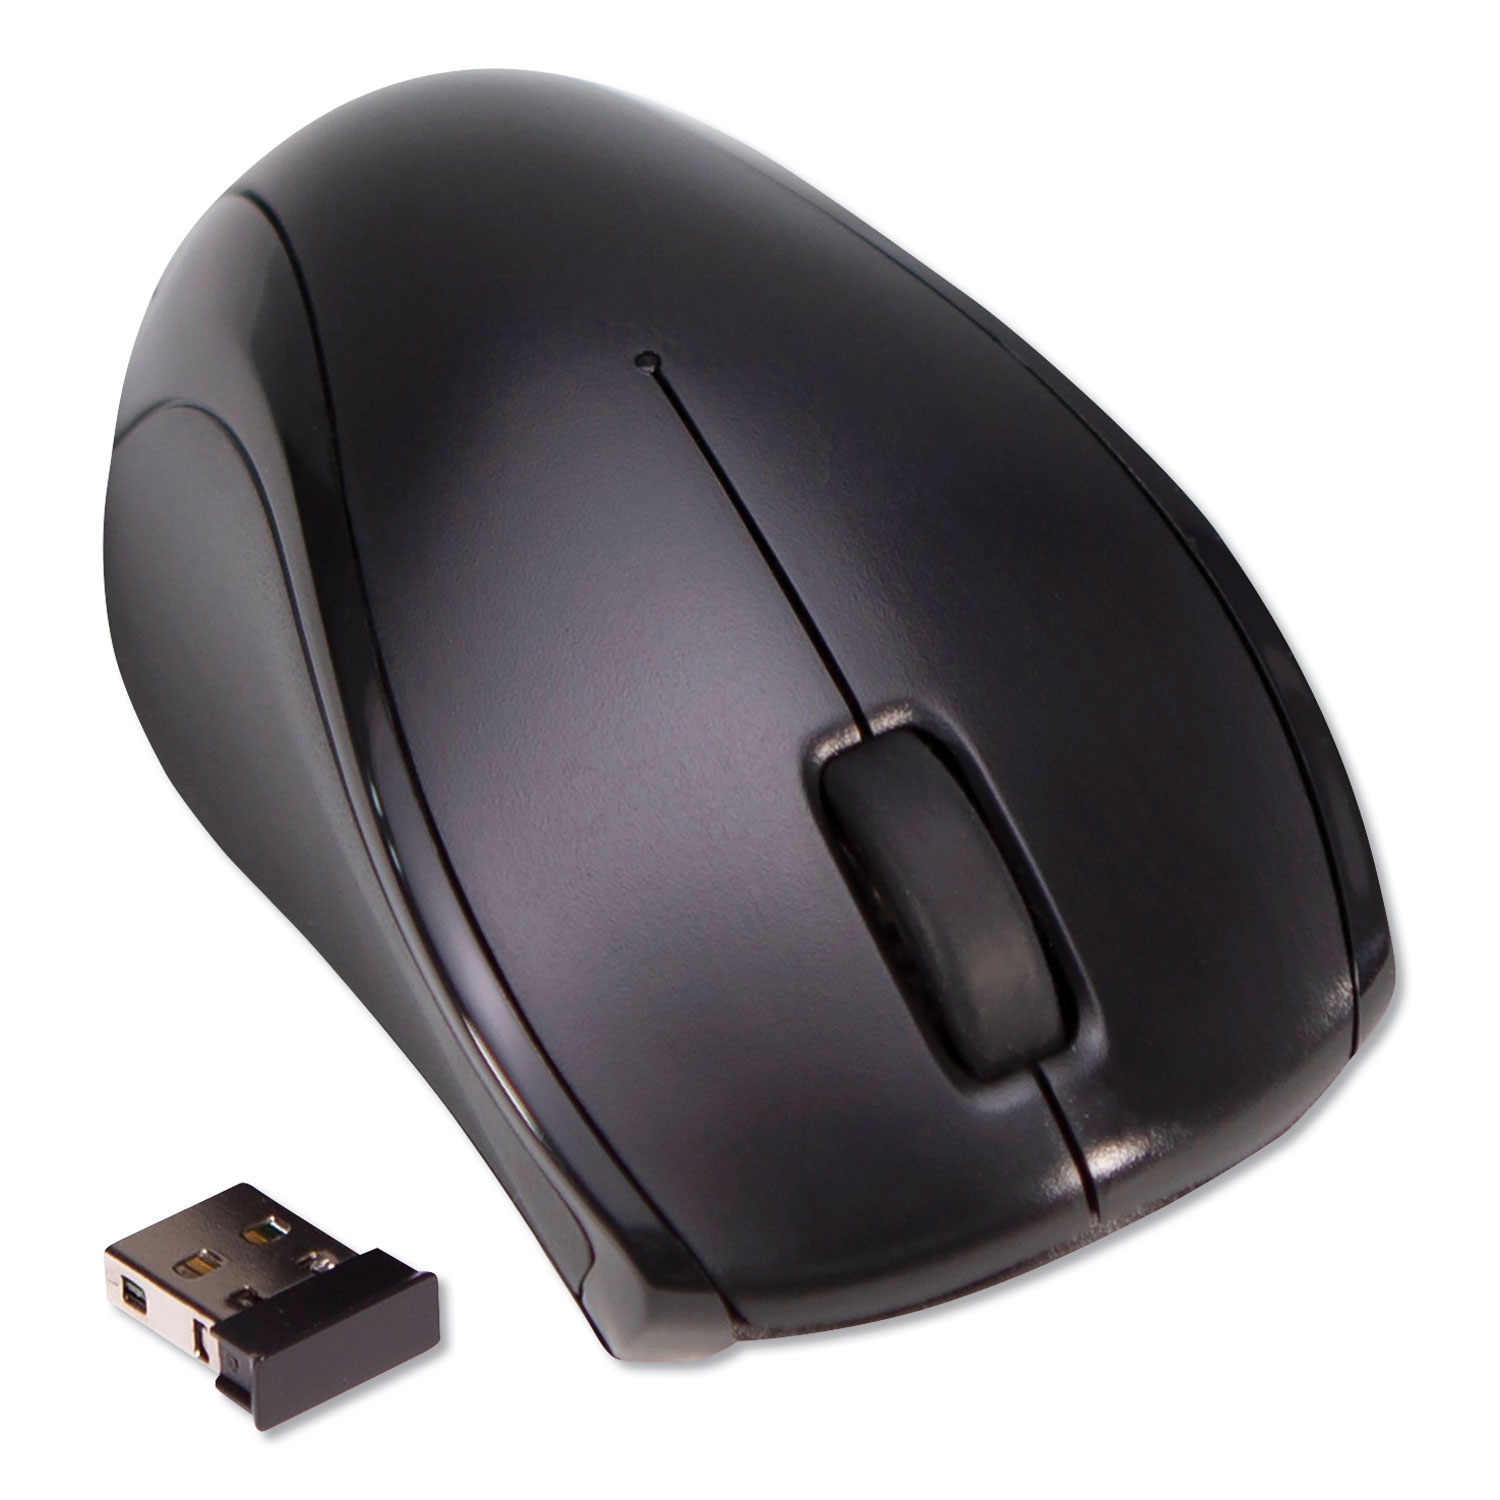 Compact Travel Mouse, 2.4 GHz Frequency/26 ft Wireless Range, Left/Right Hand Use, Black